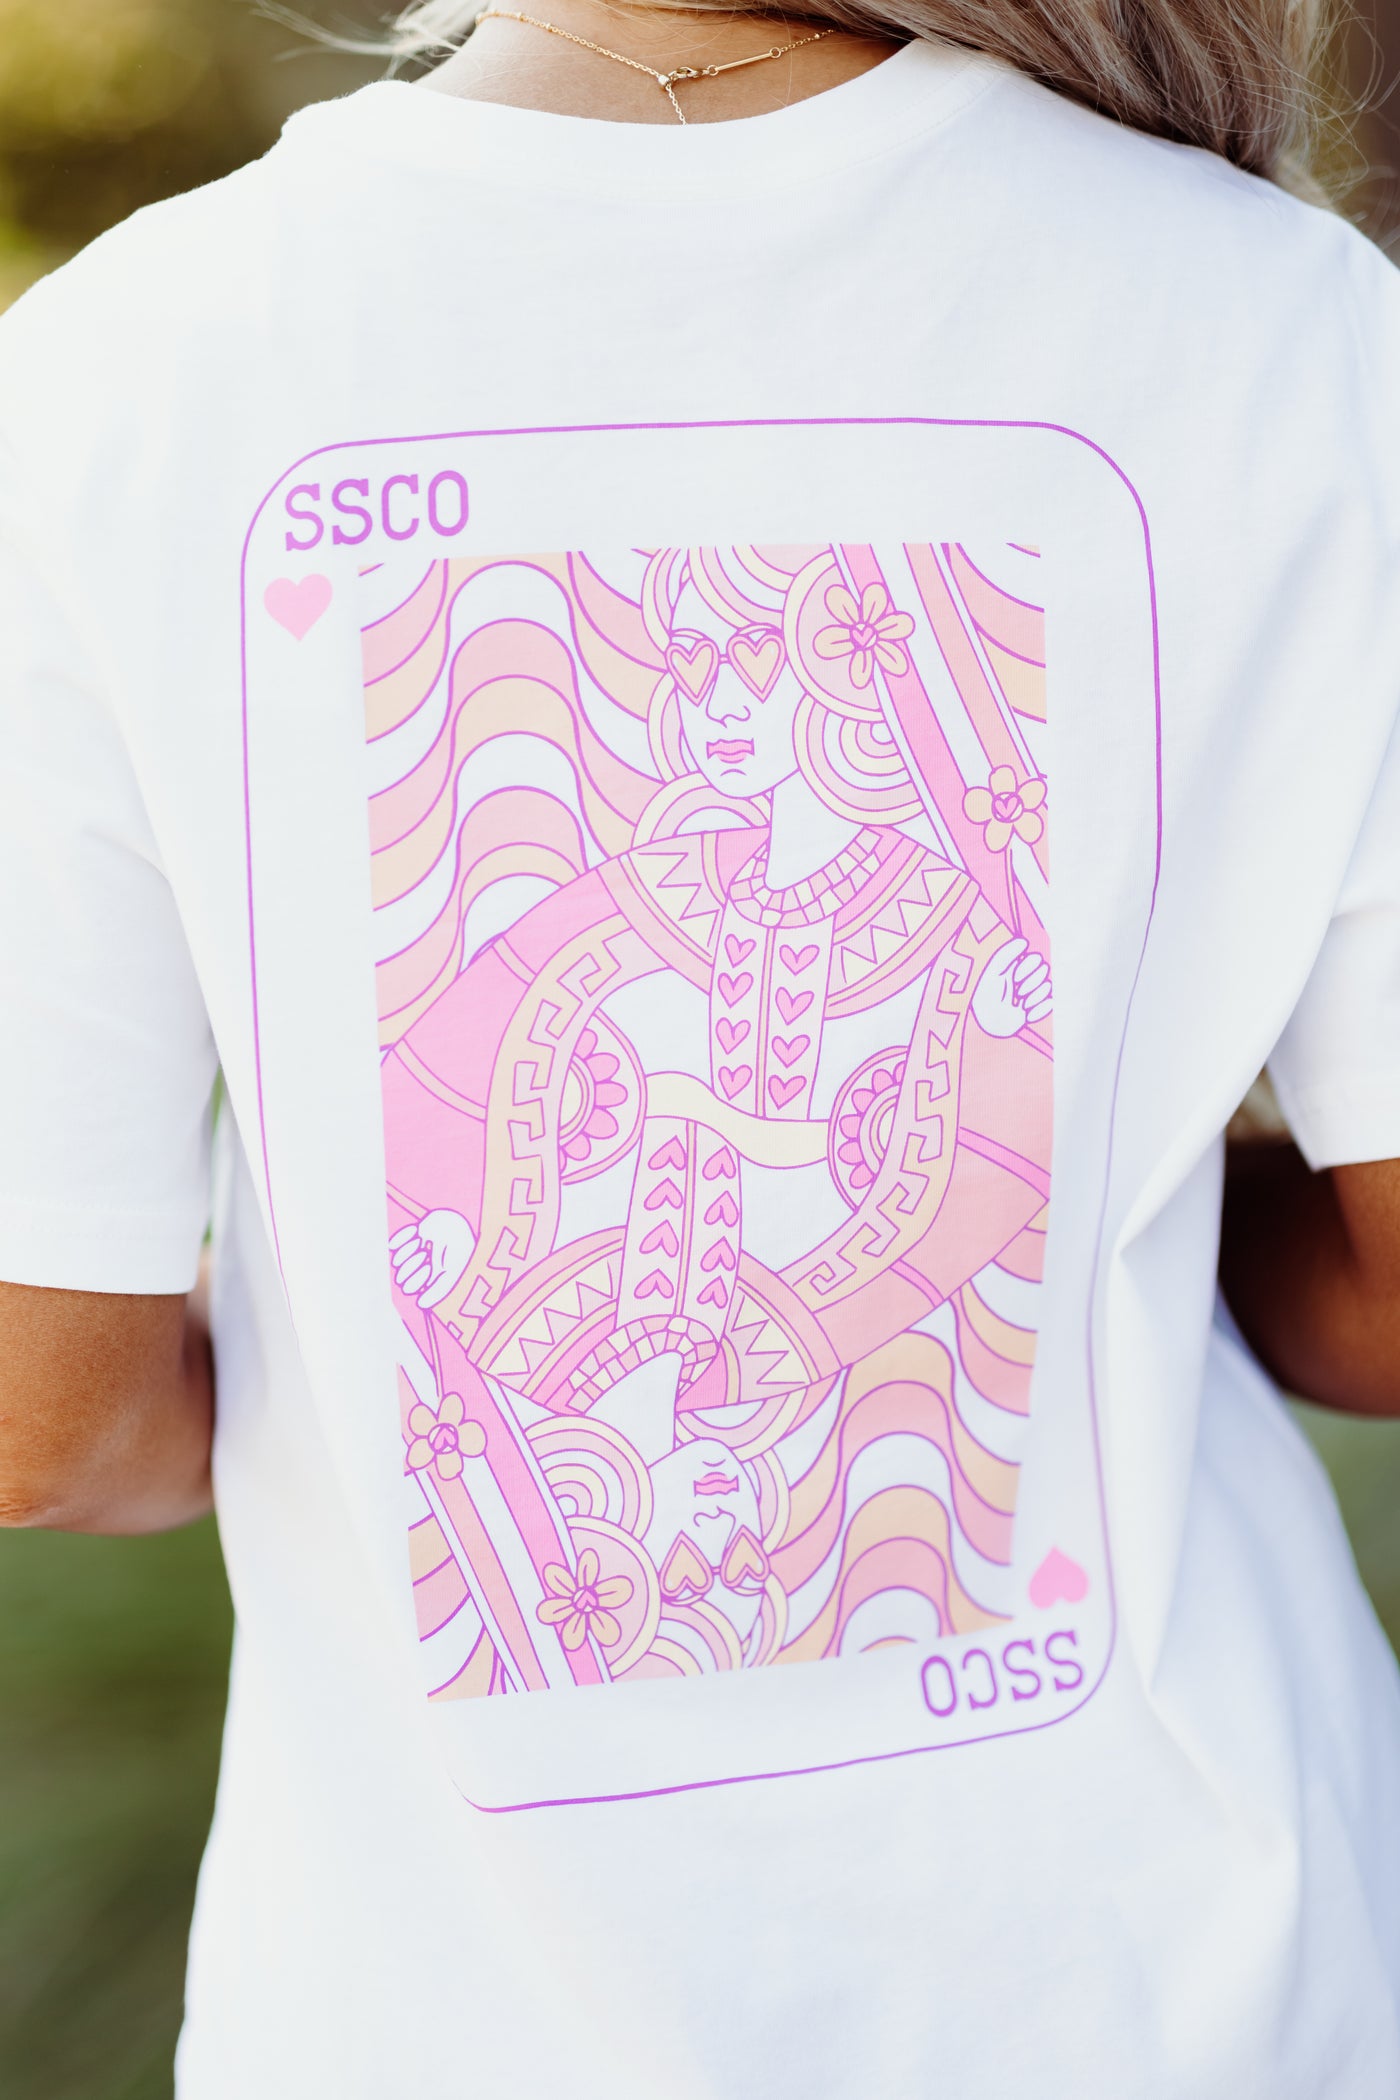 Southern Shirt Queen of Hearts Graphic Tee in Bright White